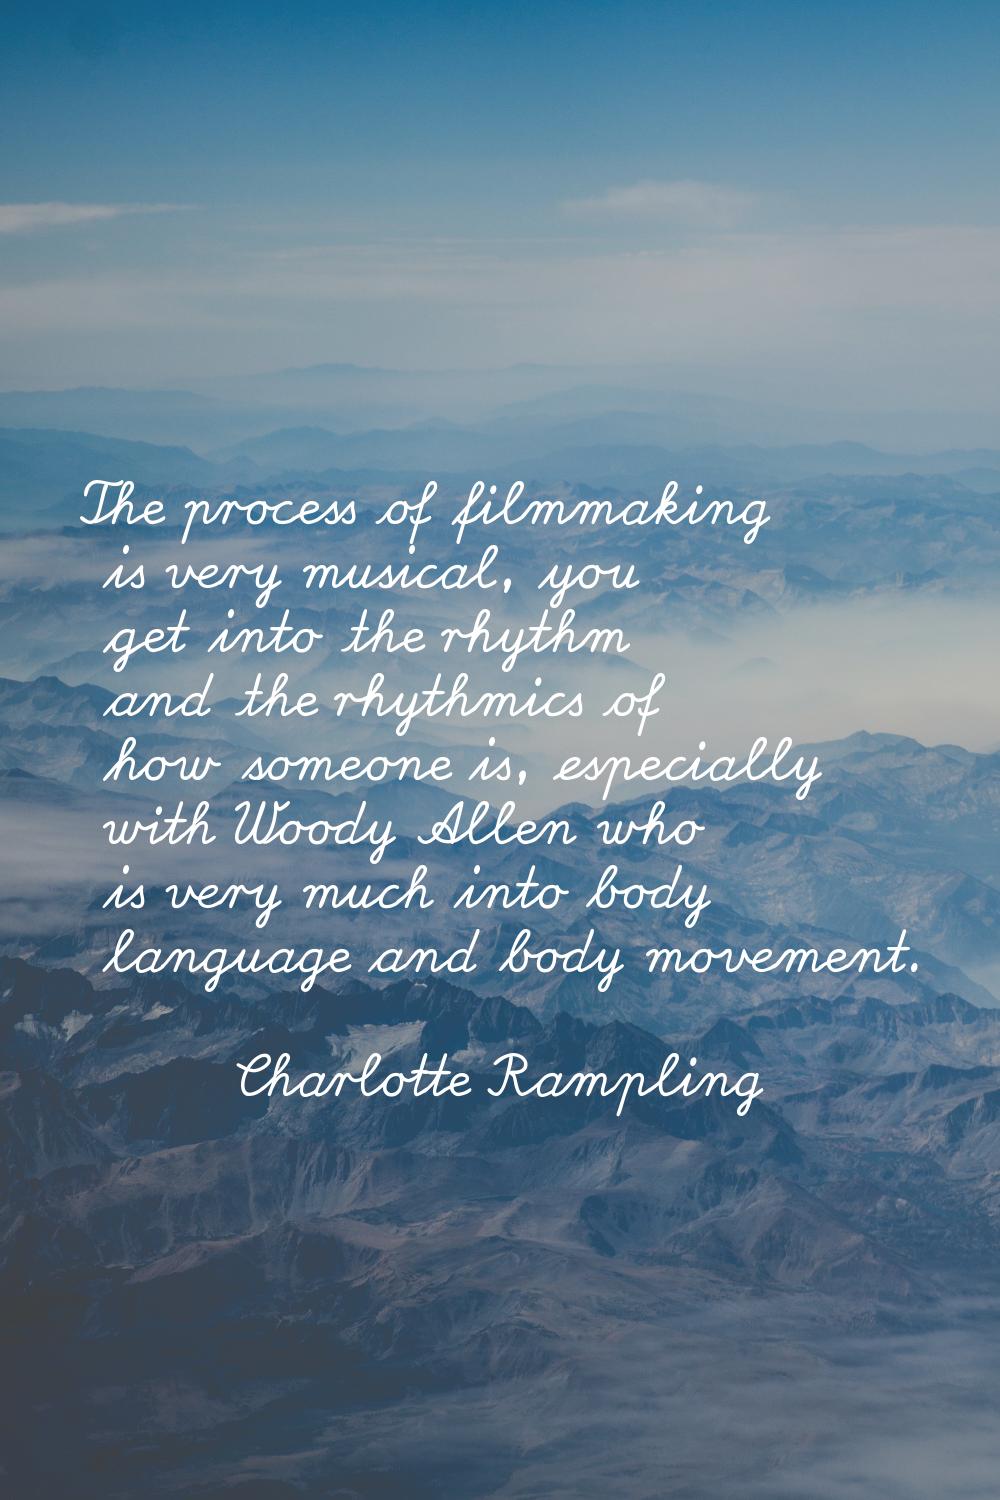 The process of filmmaking is very musical, you get into the rhythm and the rhythmics of how someone